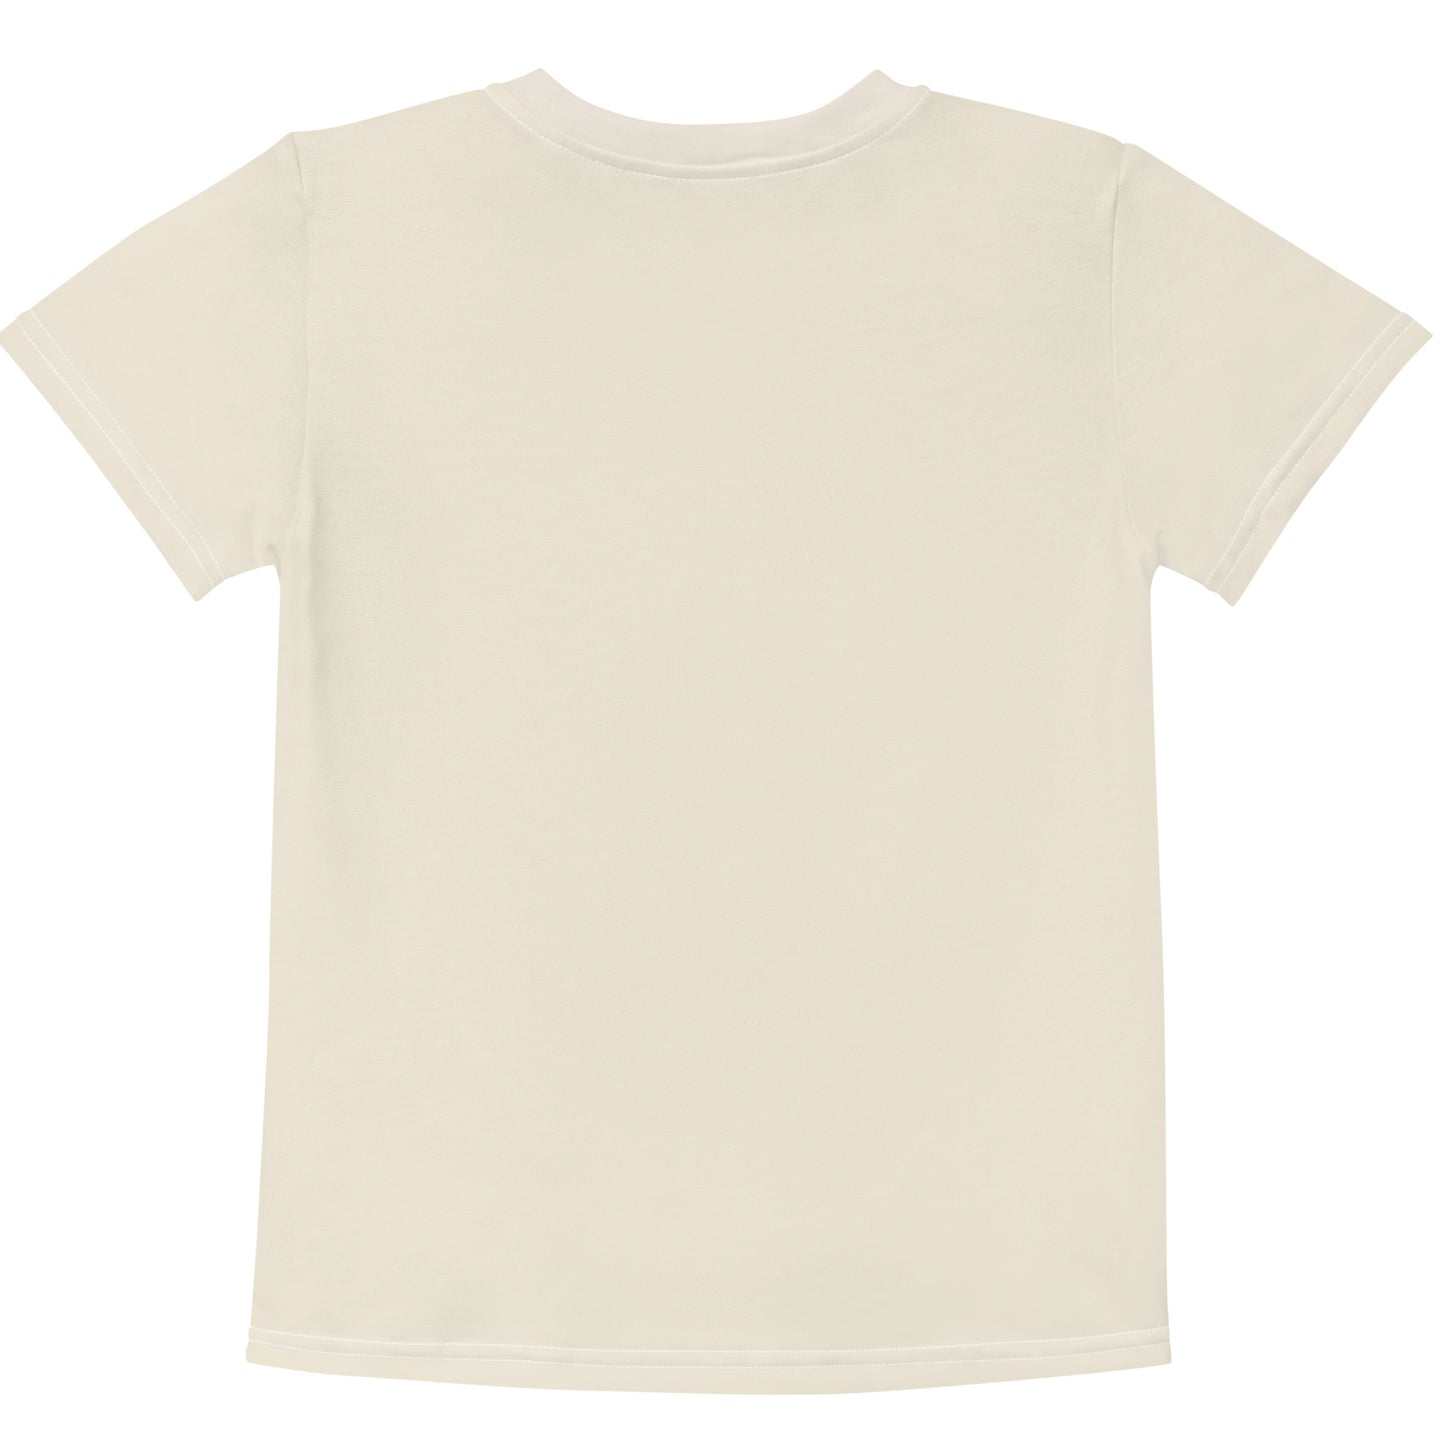 Light Grey Climate Change Global Warming Statement - Sustainably Made Kid's T-Shirt